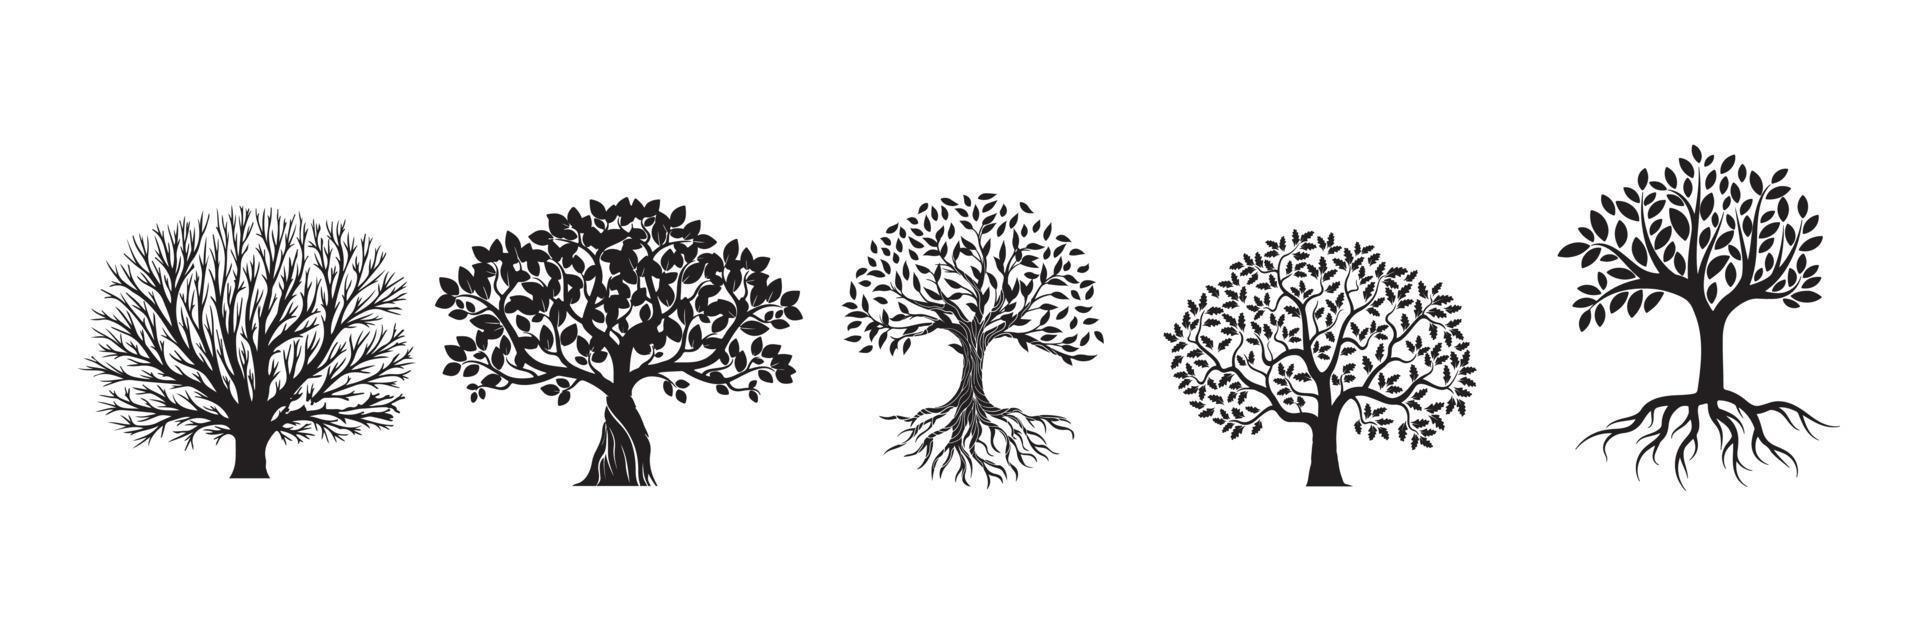 Set of trees silhouette isolated on white background vector